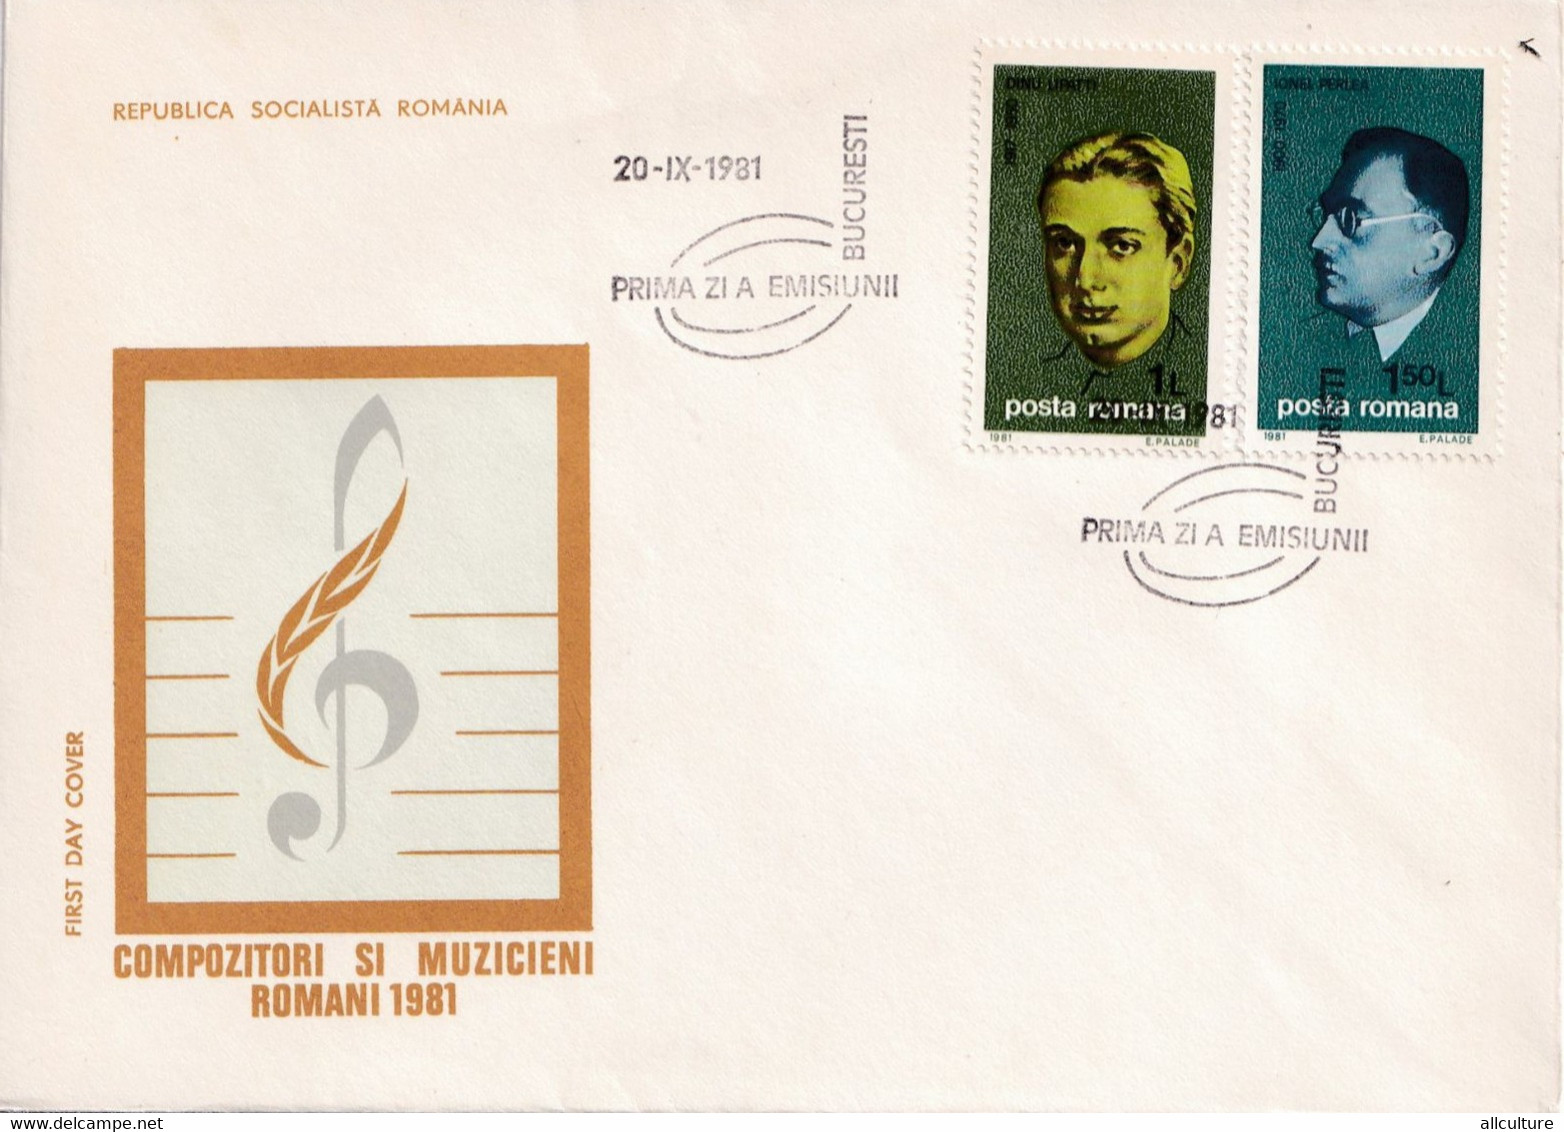 A2876 - Romanian Musicians And Composers, Bucuresti  1981, Socialist Republic Of Romania 3 Covers  FDC - Cantantes